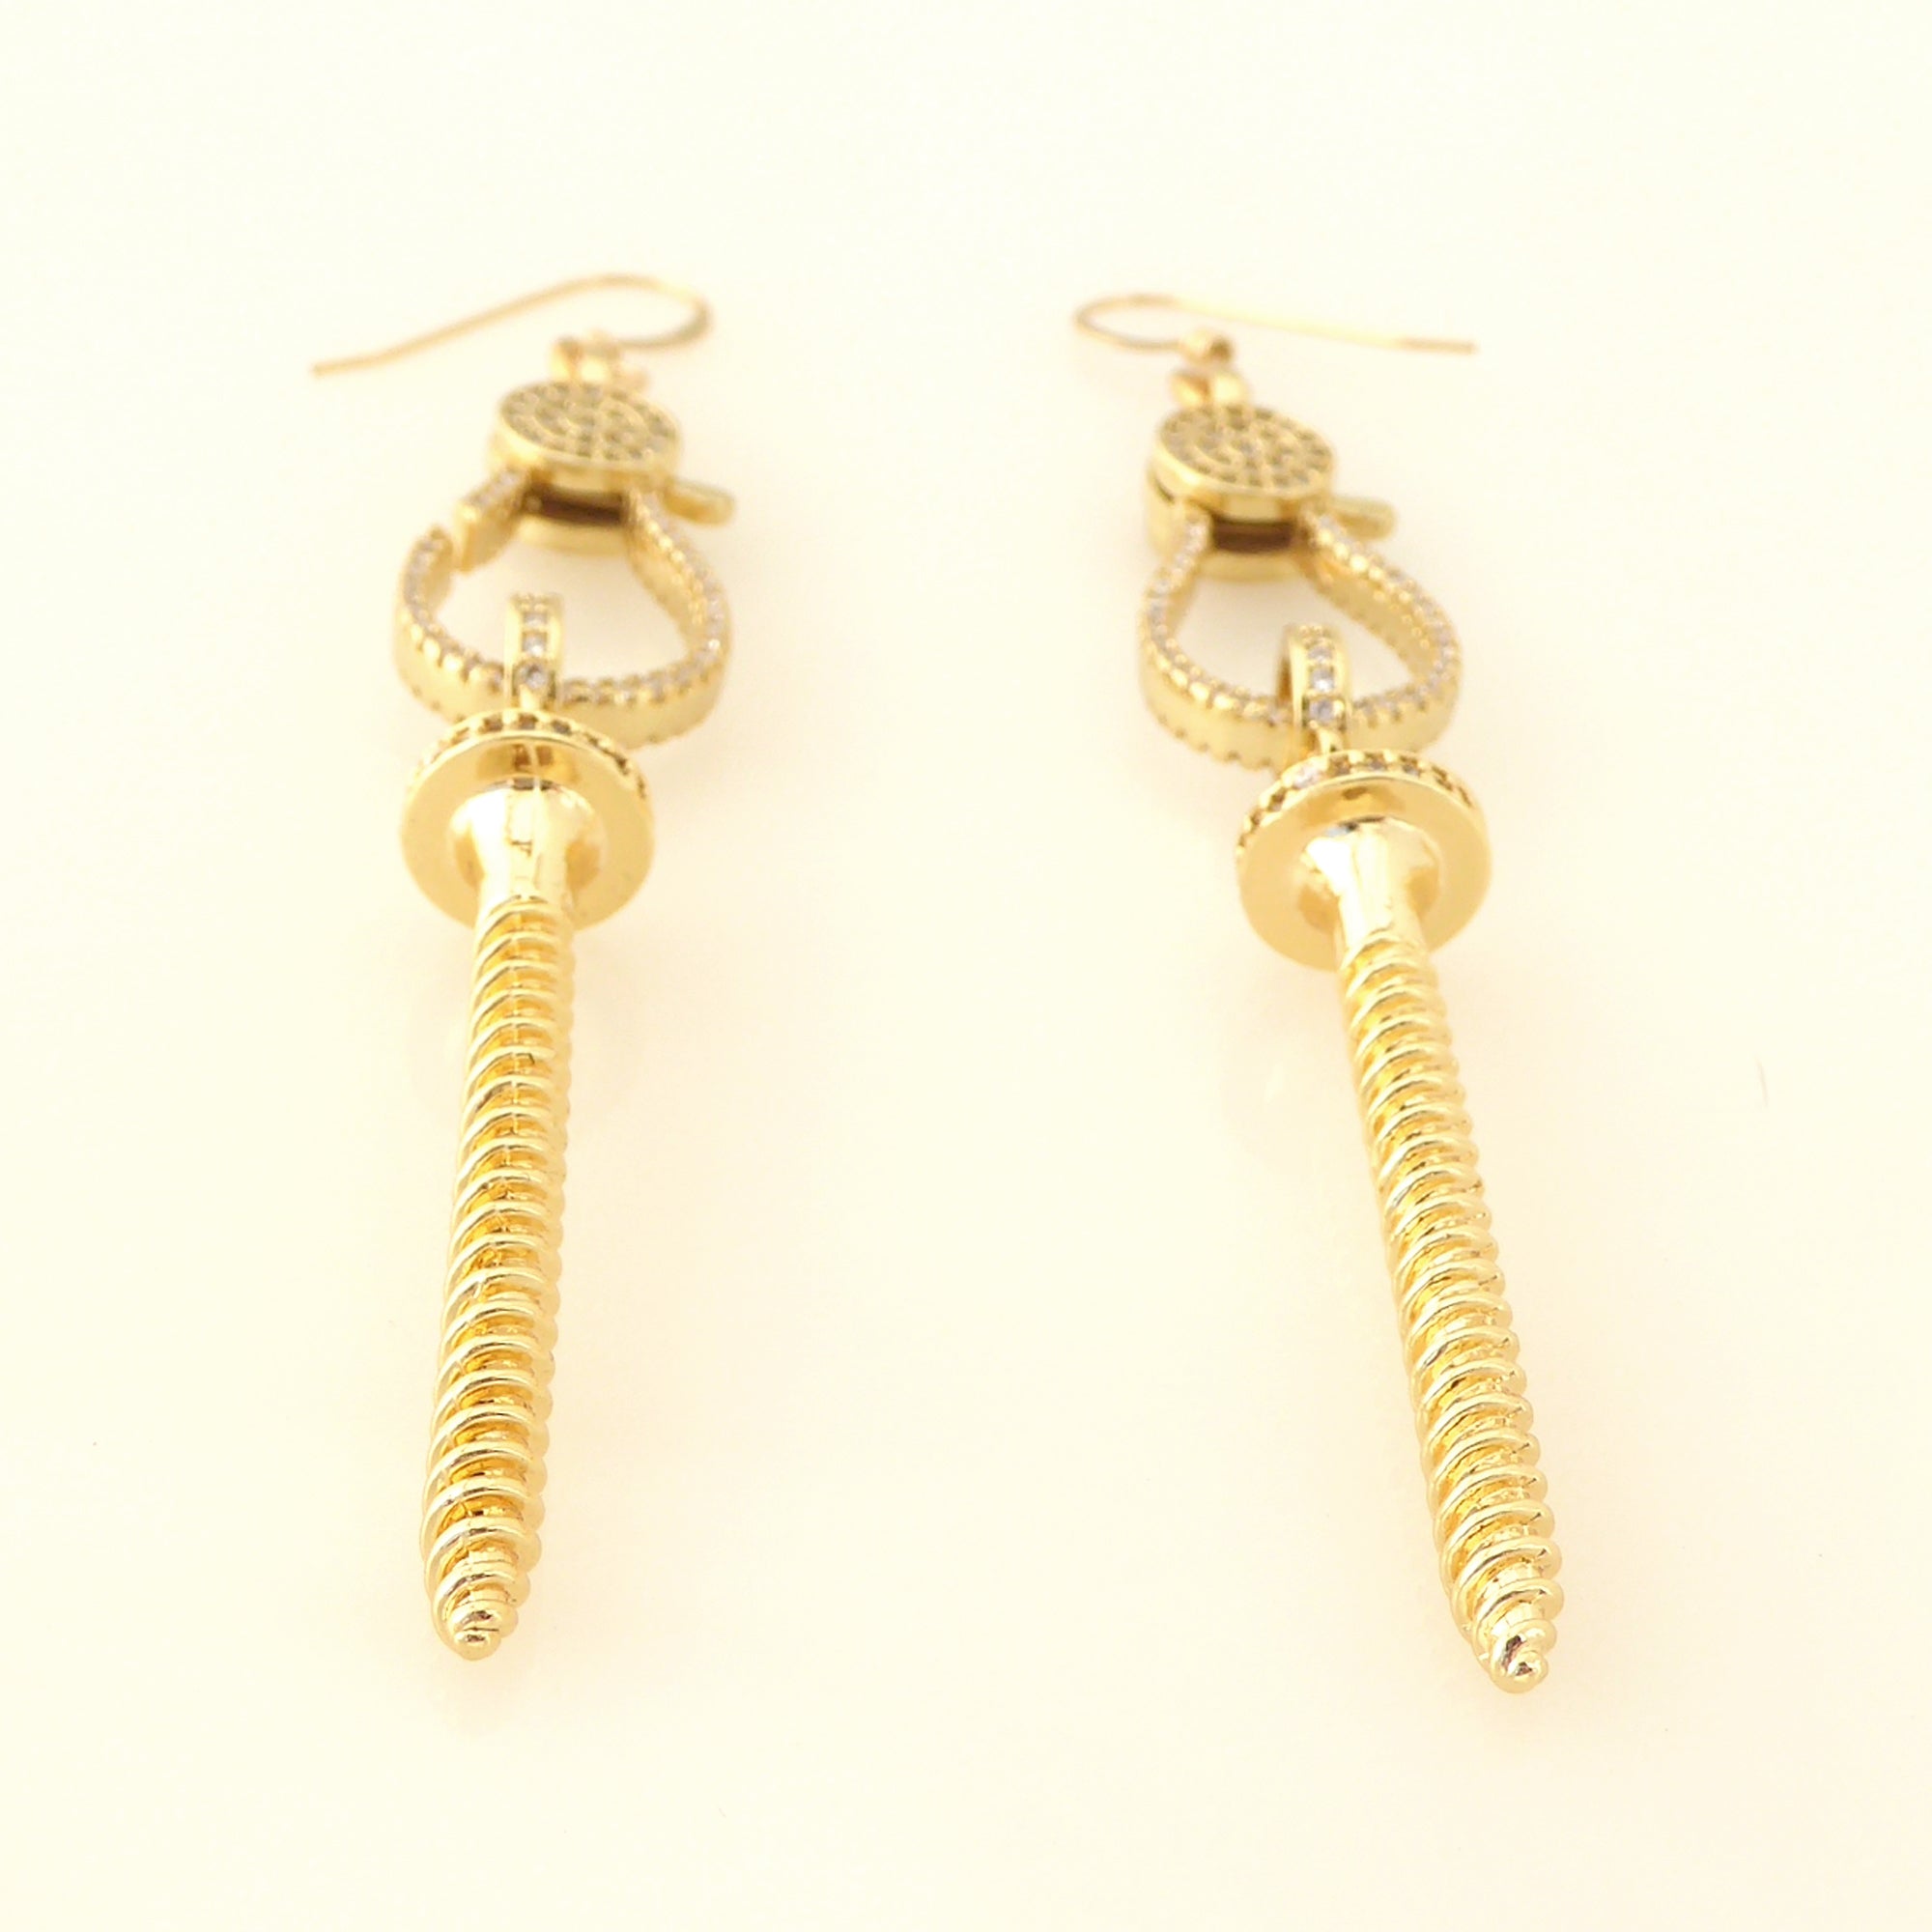 Gold pave rhinestone screw earrings by Jenny Dayco 3